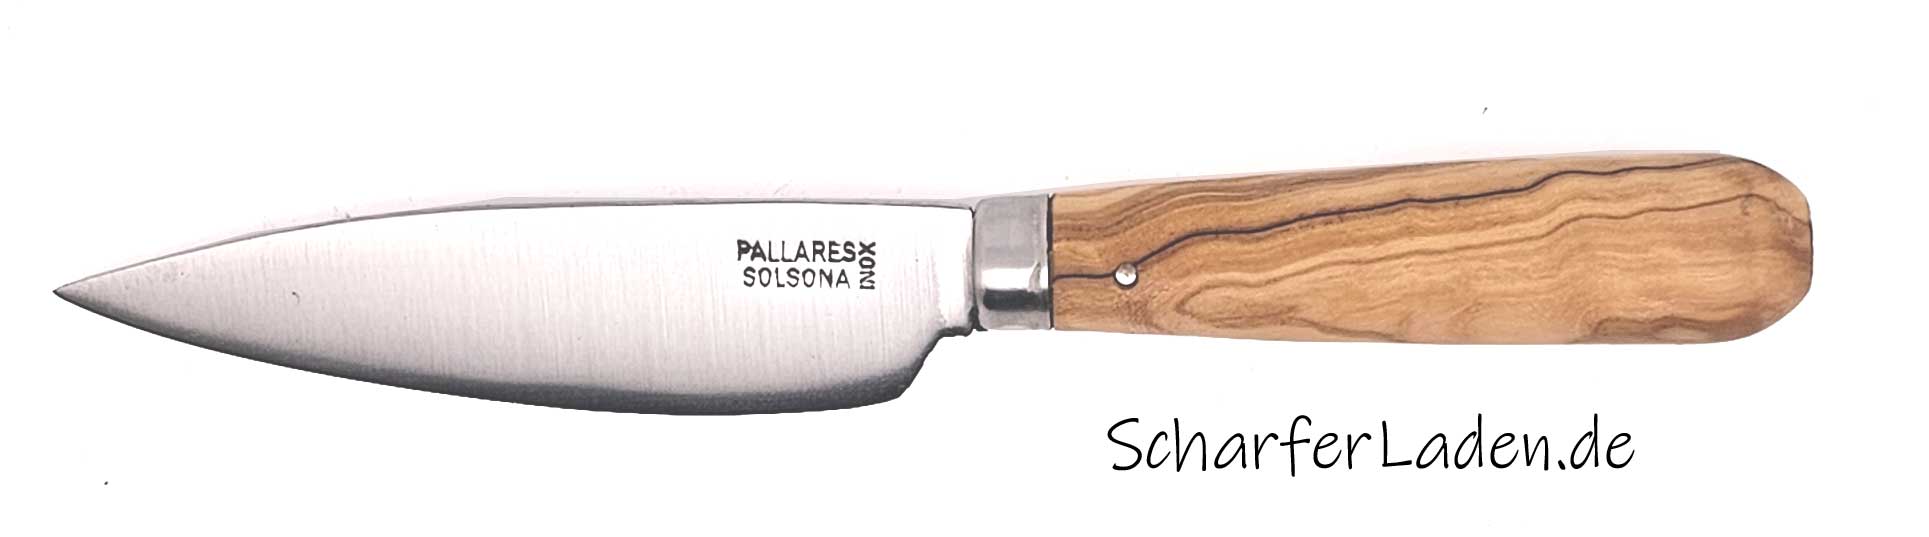 PALLARS Office knife olive wood stainless